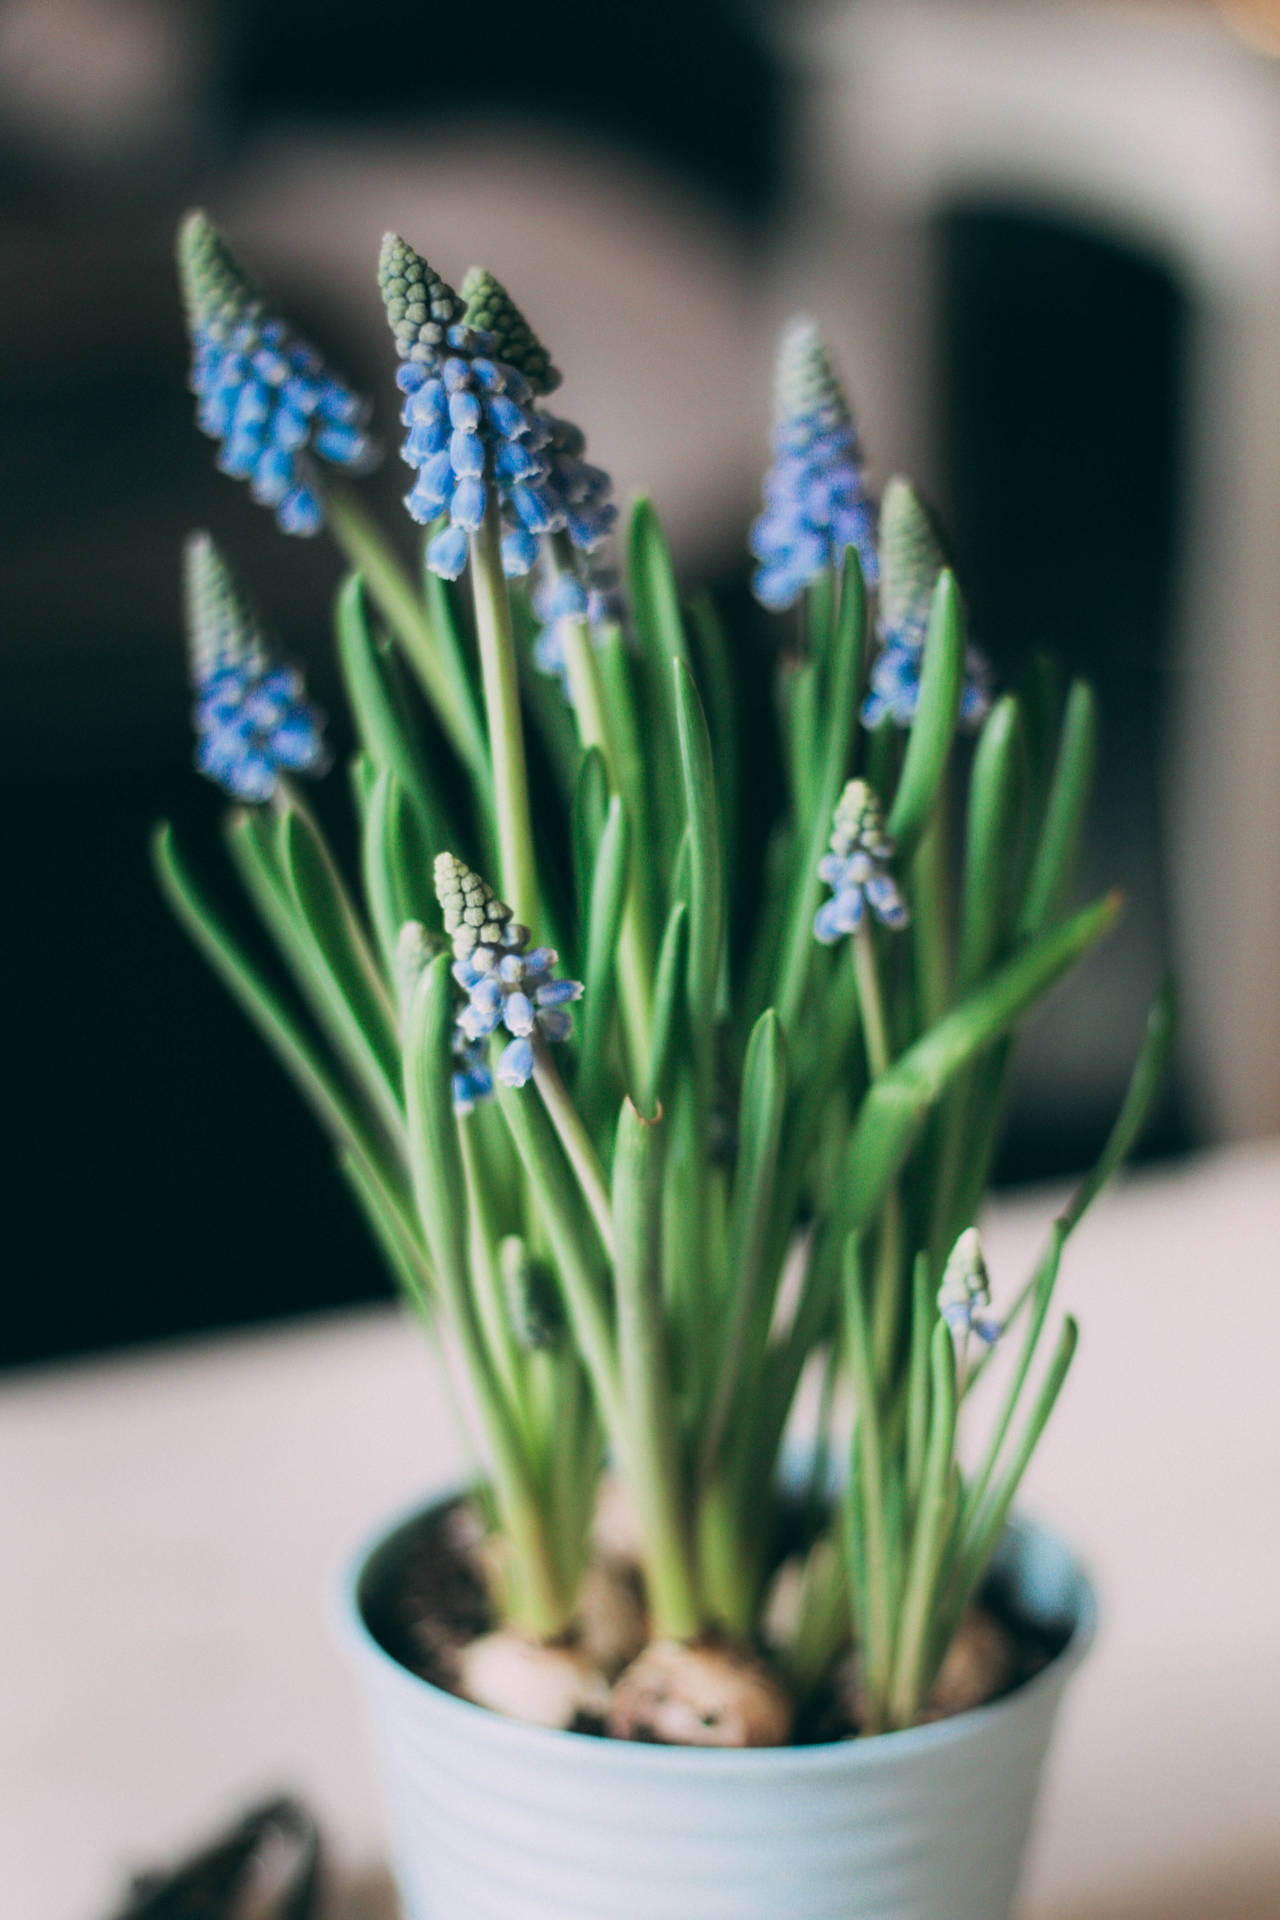 Young Blue Hyacinth Flowers